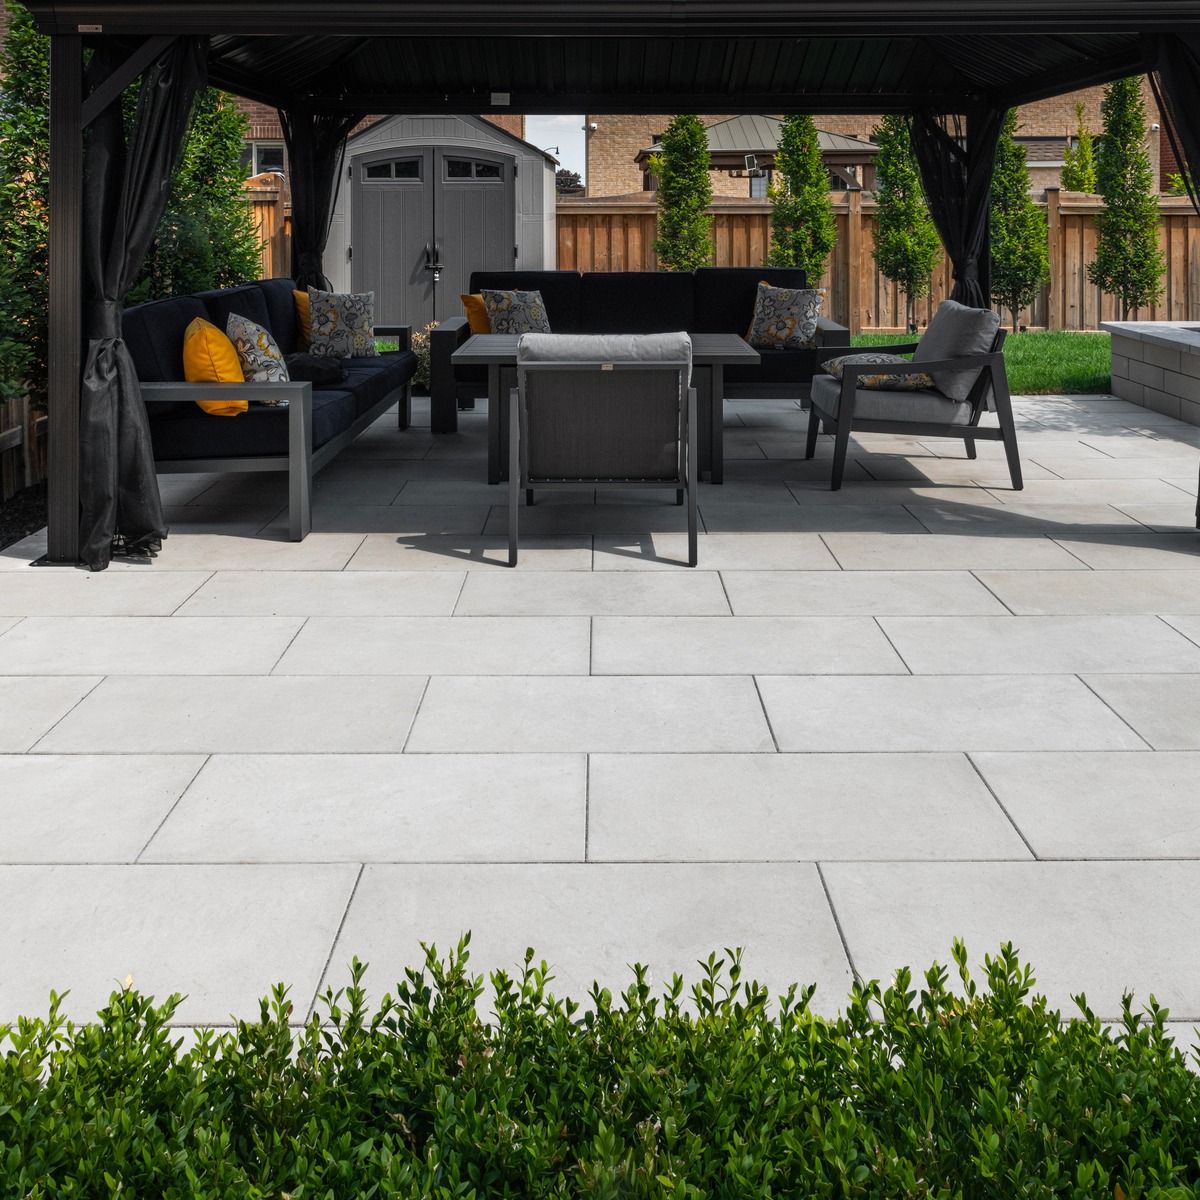 Large concrete pavers on an outdoor patio with canopy